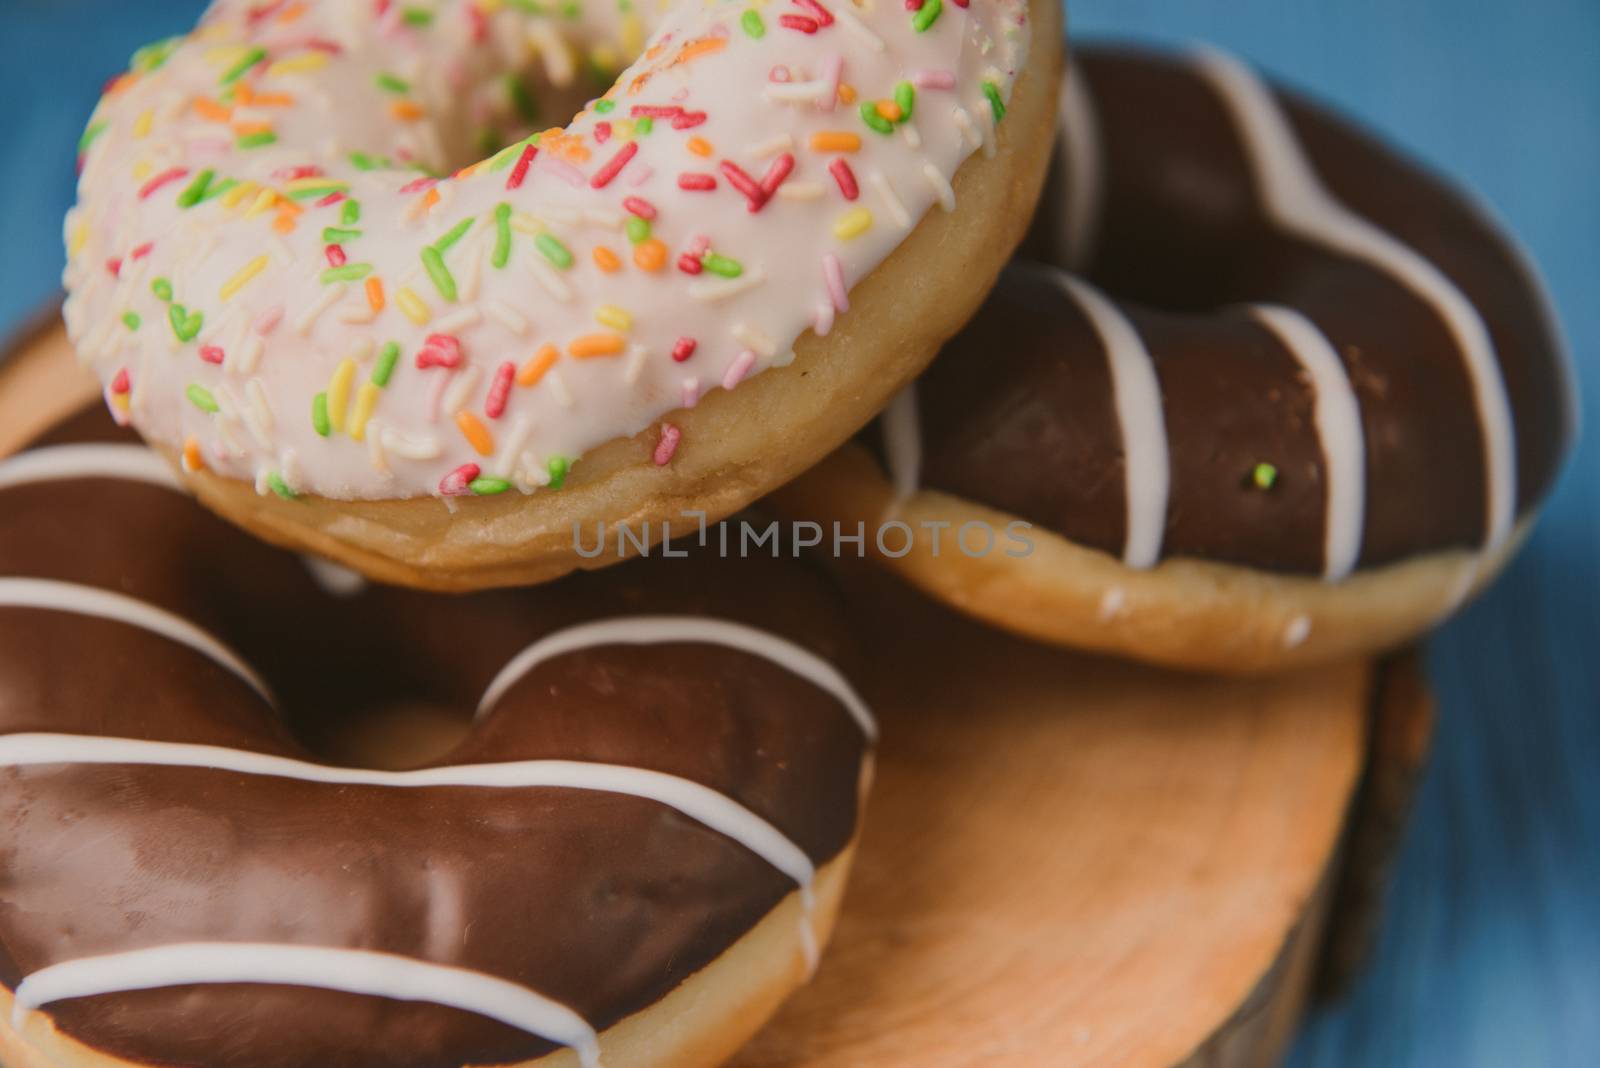 donuts lying on the table. blue background.